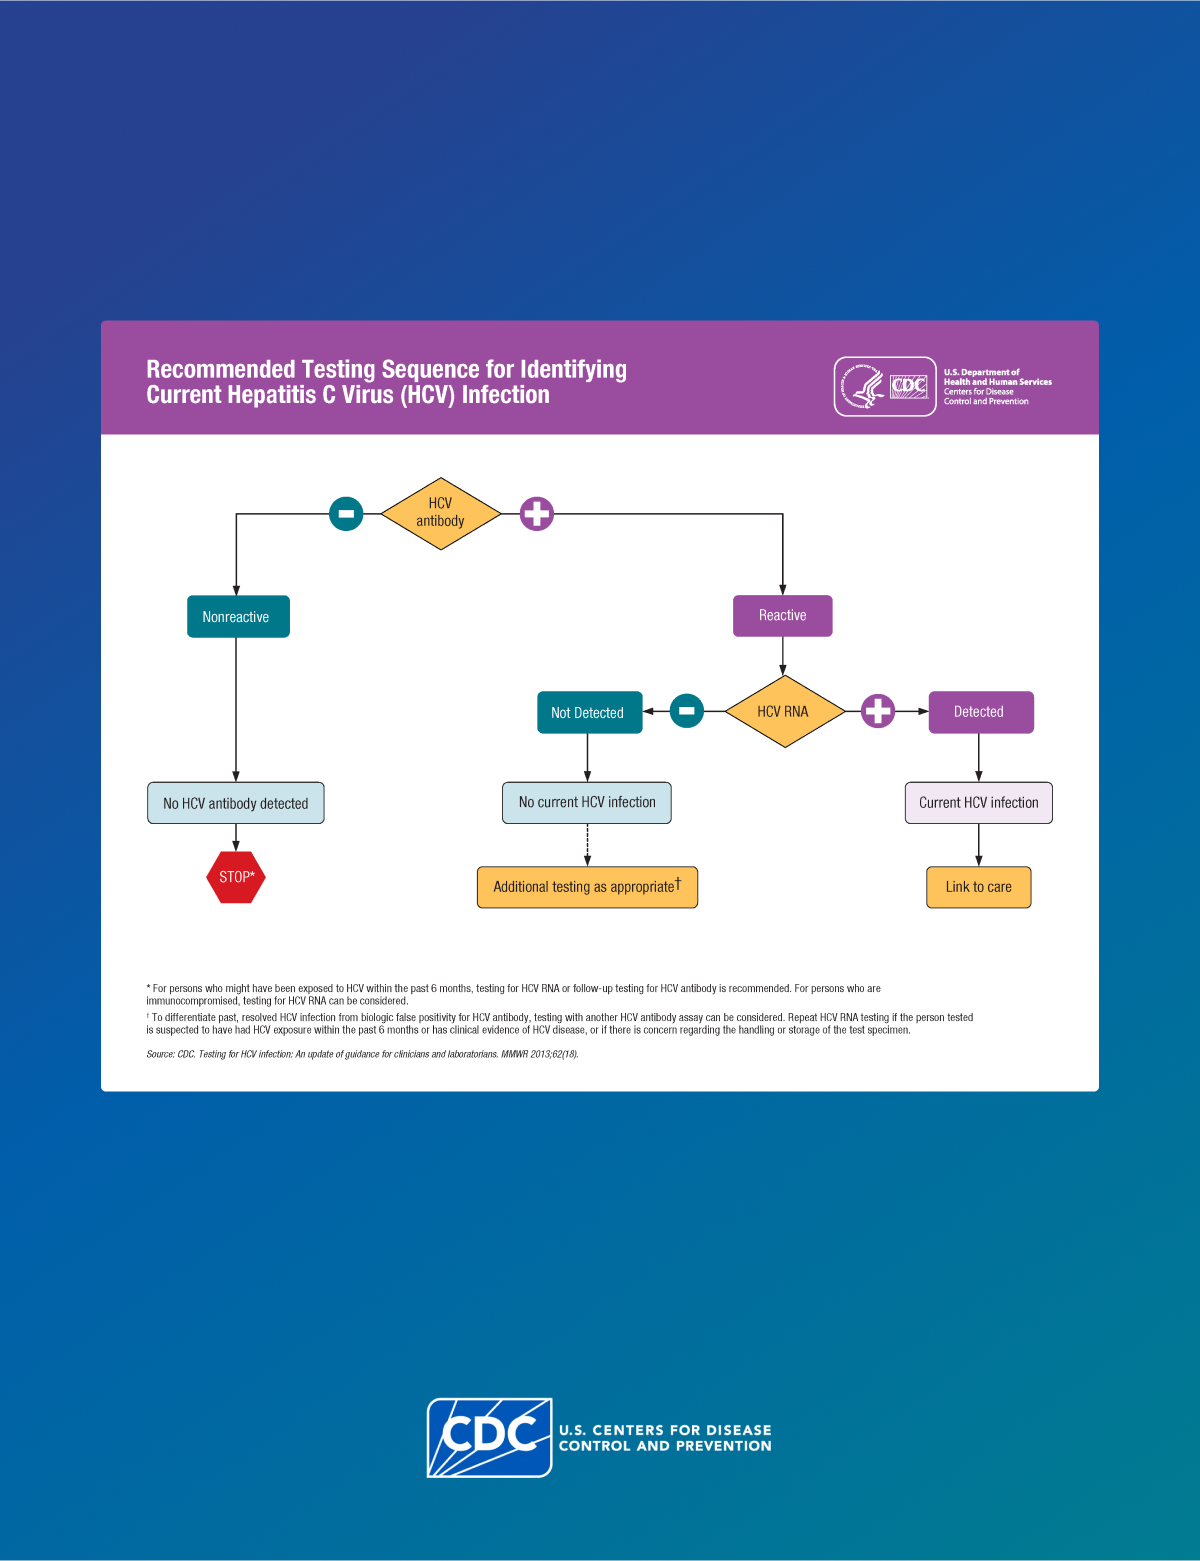 Hepatitis C recommended testing sequence flow chart